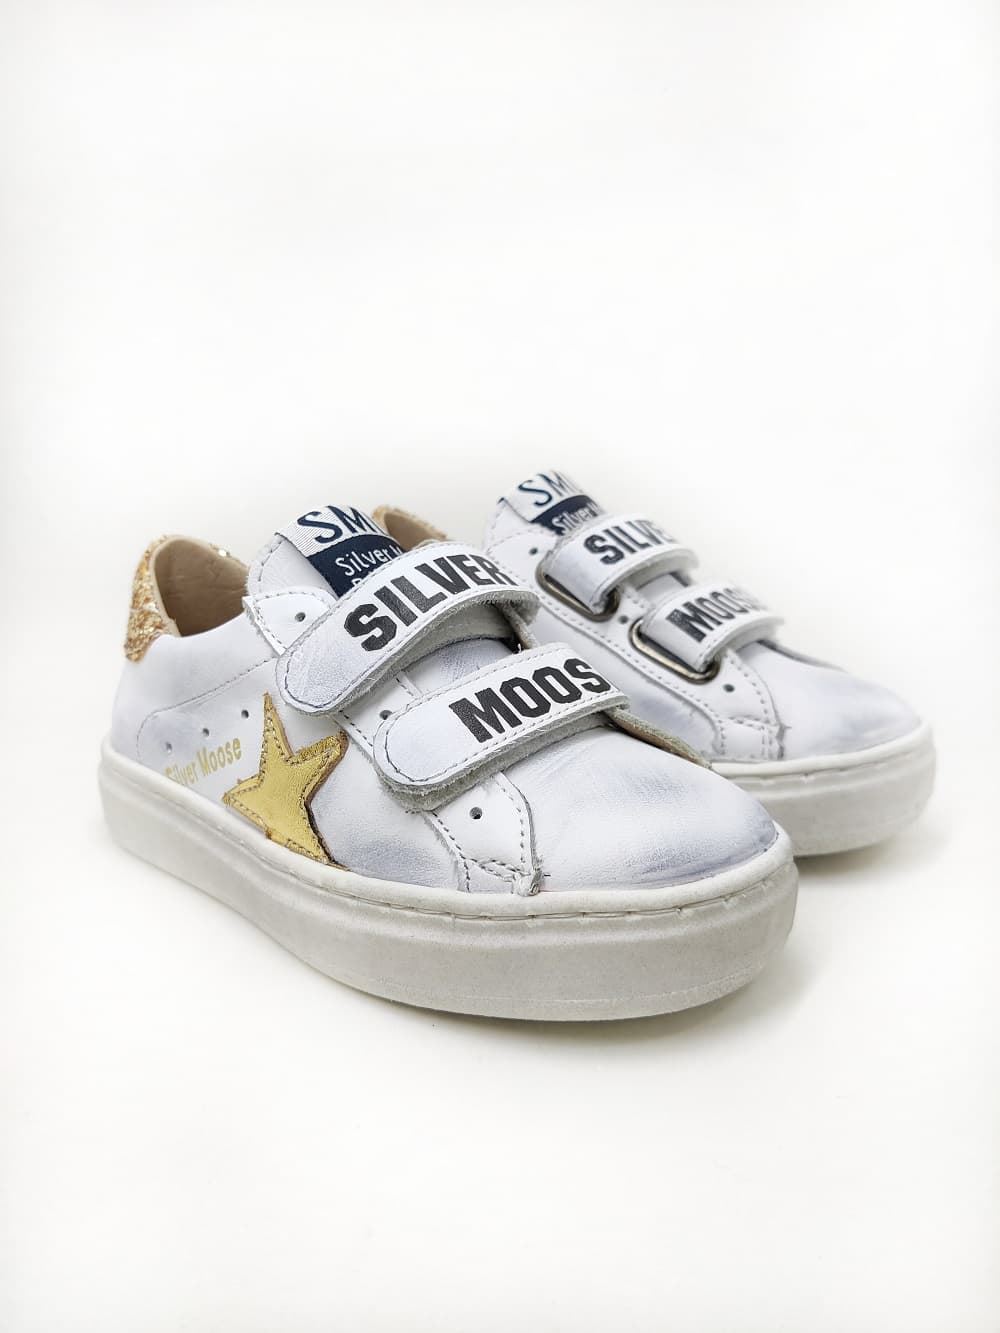 Golden Star White Glitter Gold Leather Sneakers with Velcro Yowas - Image 3